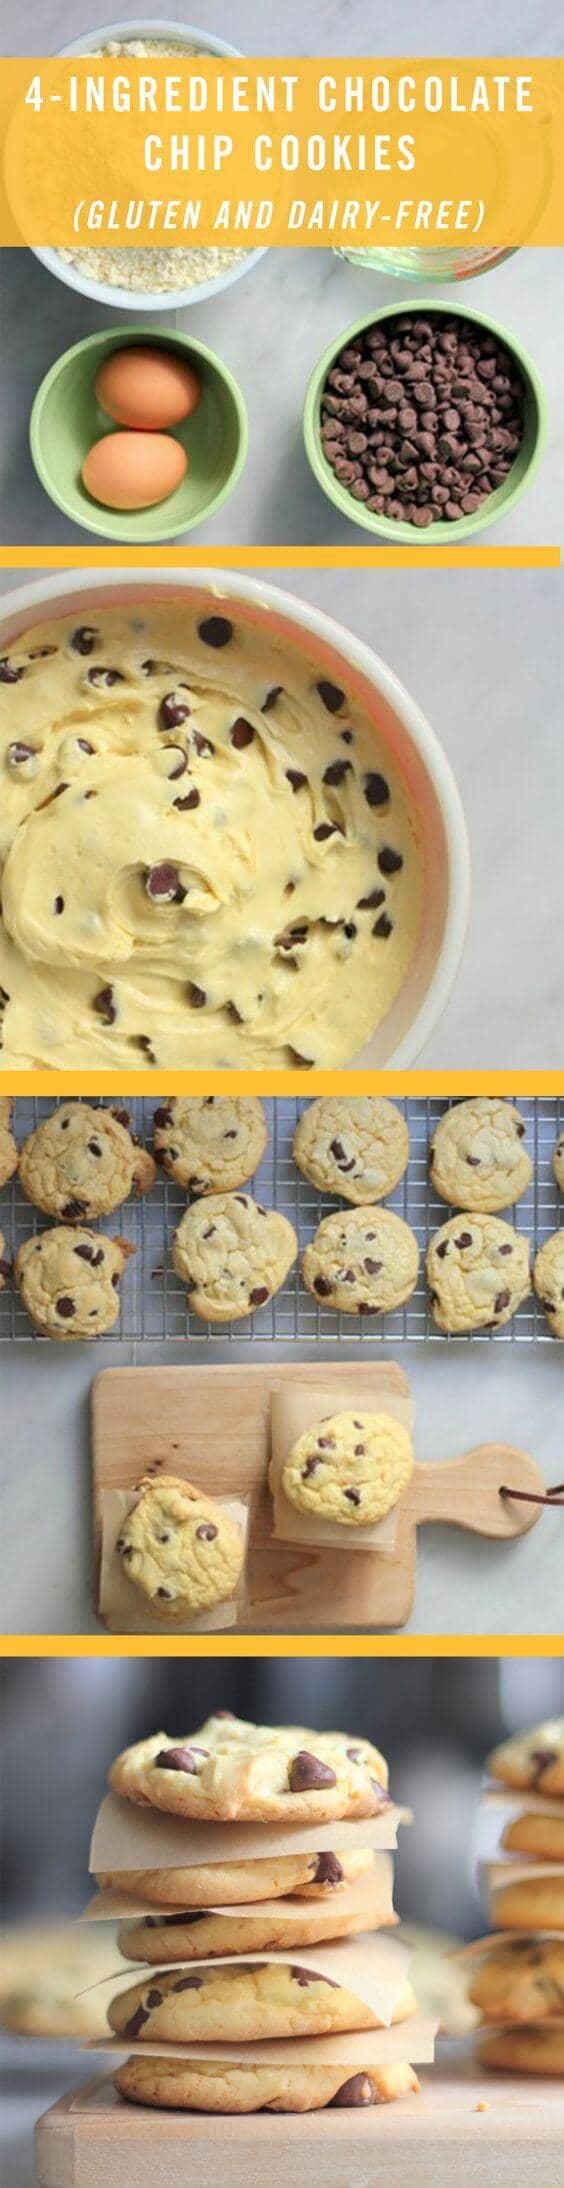 3 Recipes for 4-Ingredient Chocolate Chip Cookies